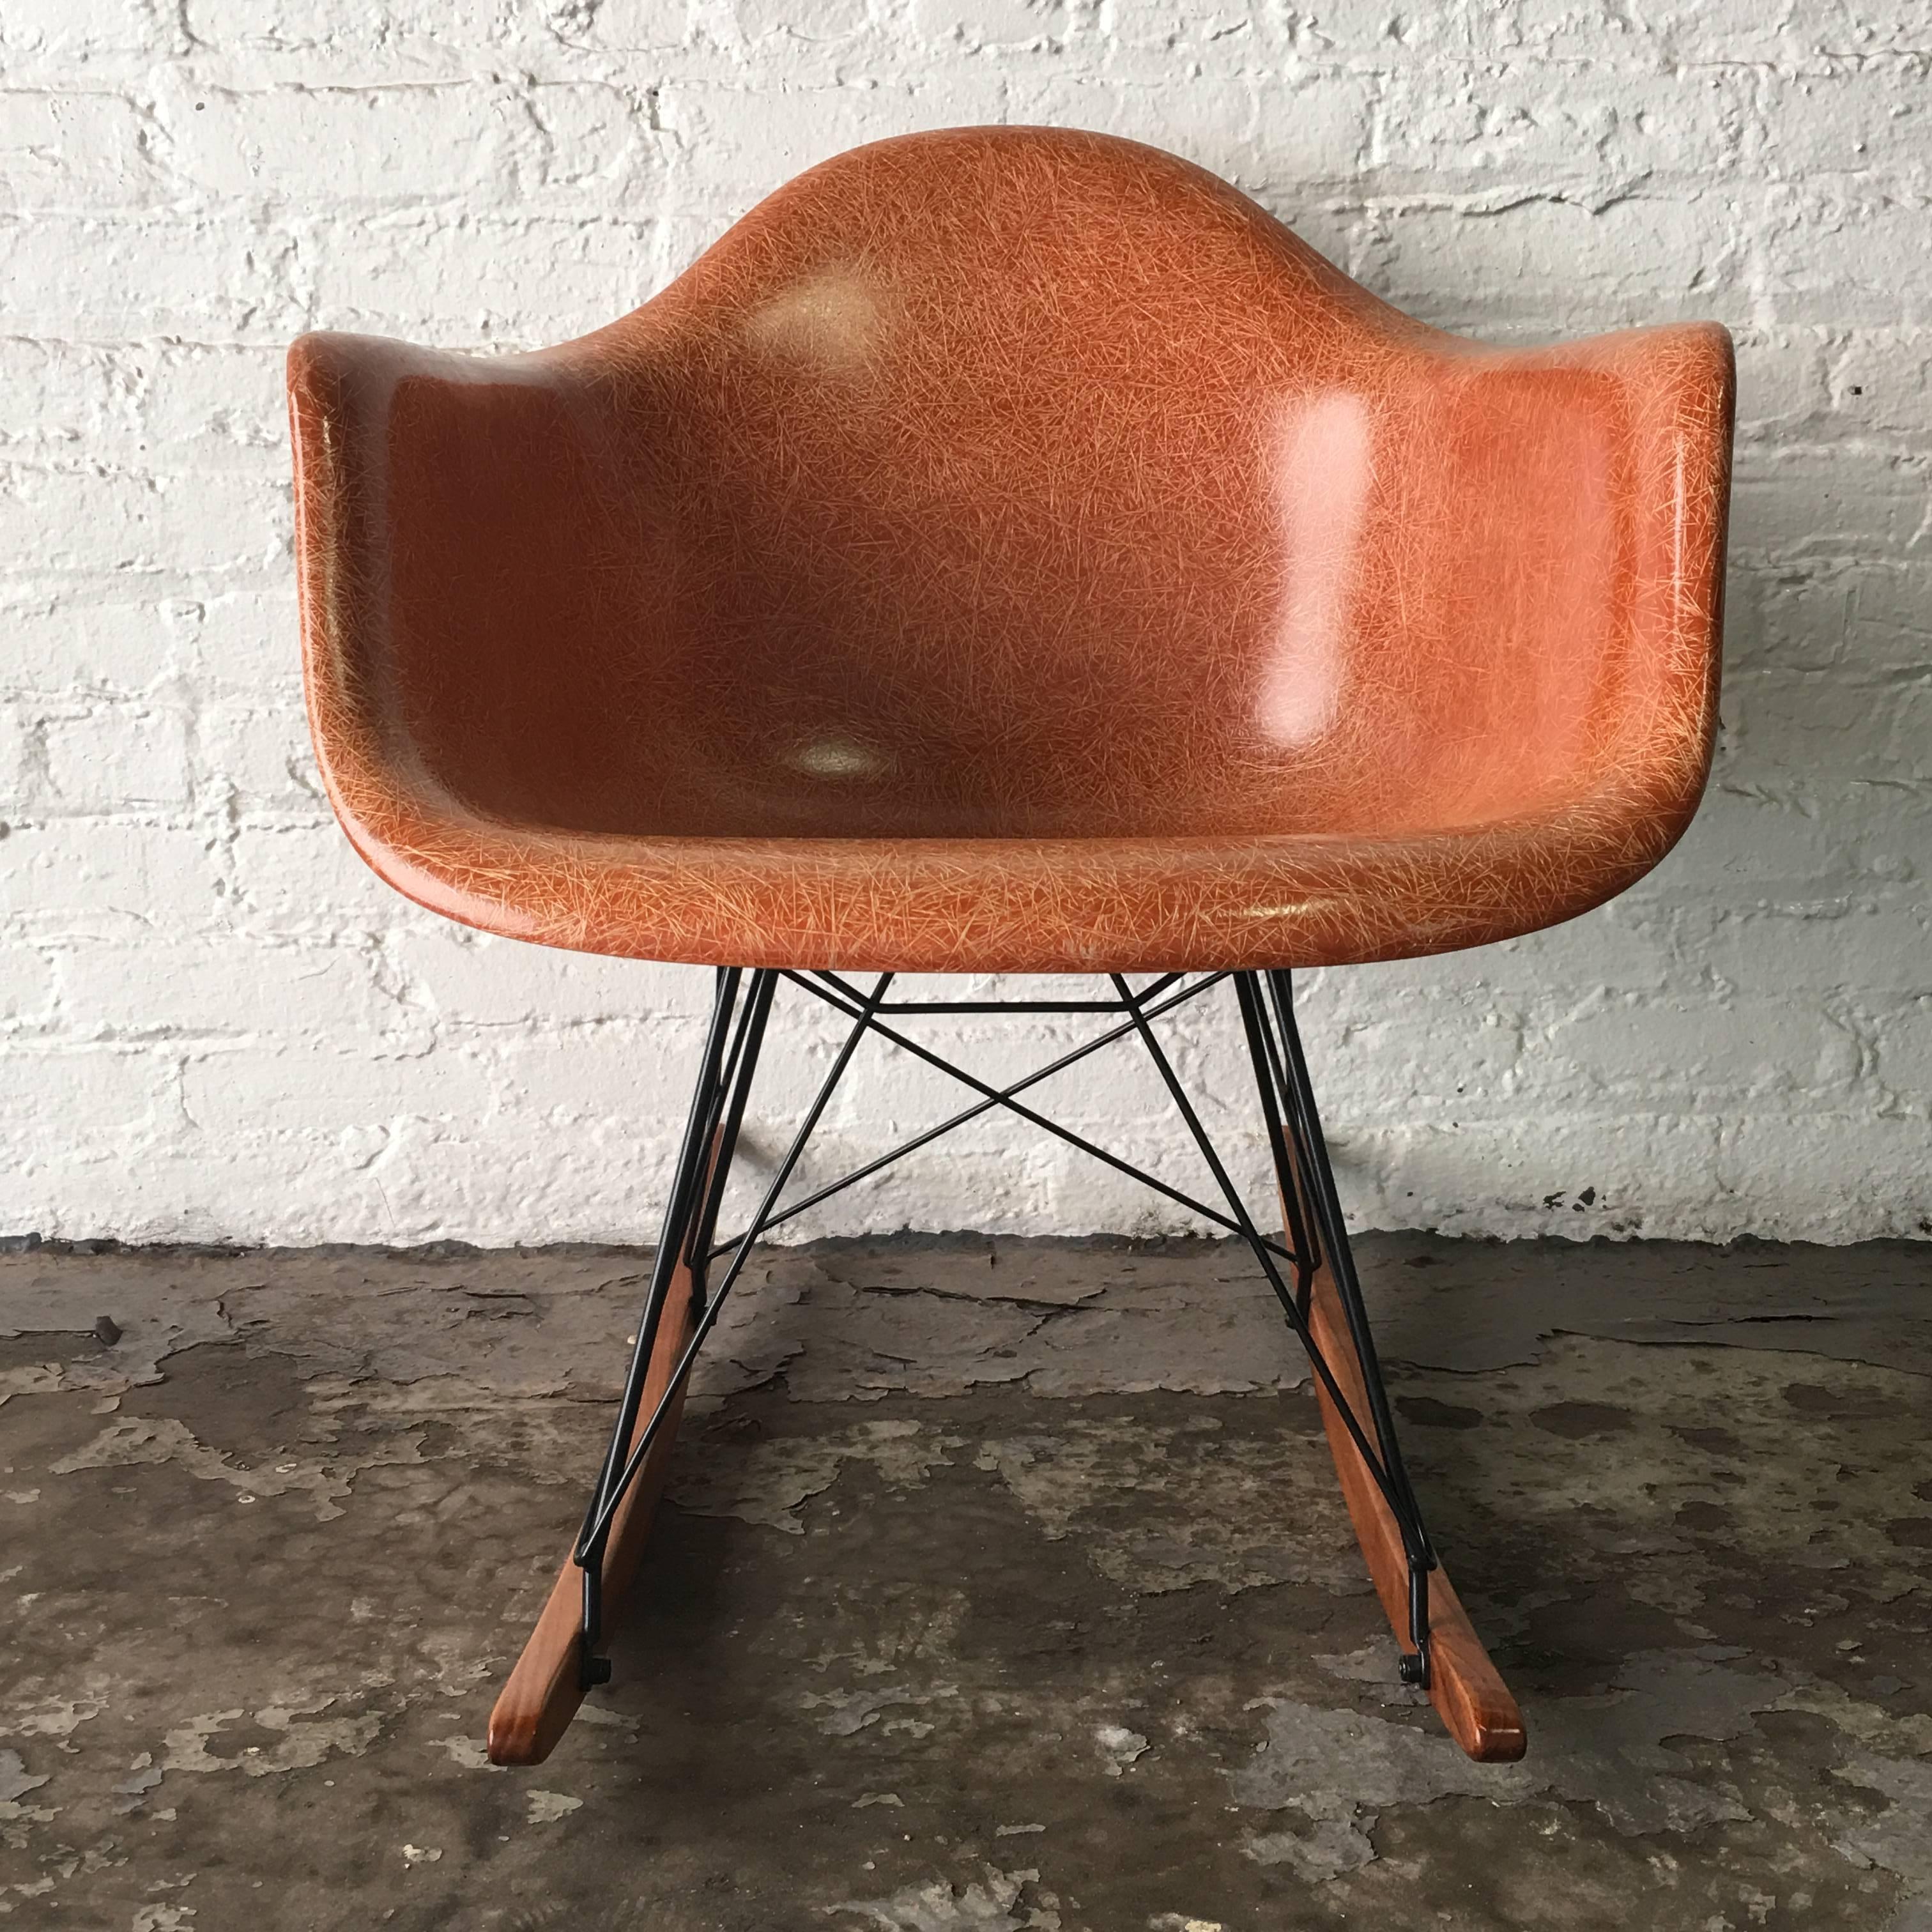 Rare color terra cotta Herman Miler Eames arm shell on Modern Conscience base. Base also available in zinc plating (Silver) and also wood available in maple or birch. Shell in very good vintage condition with no fading or cracks. Small spot of edge